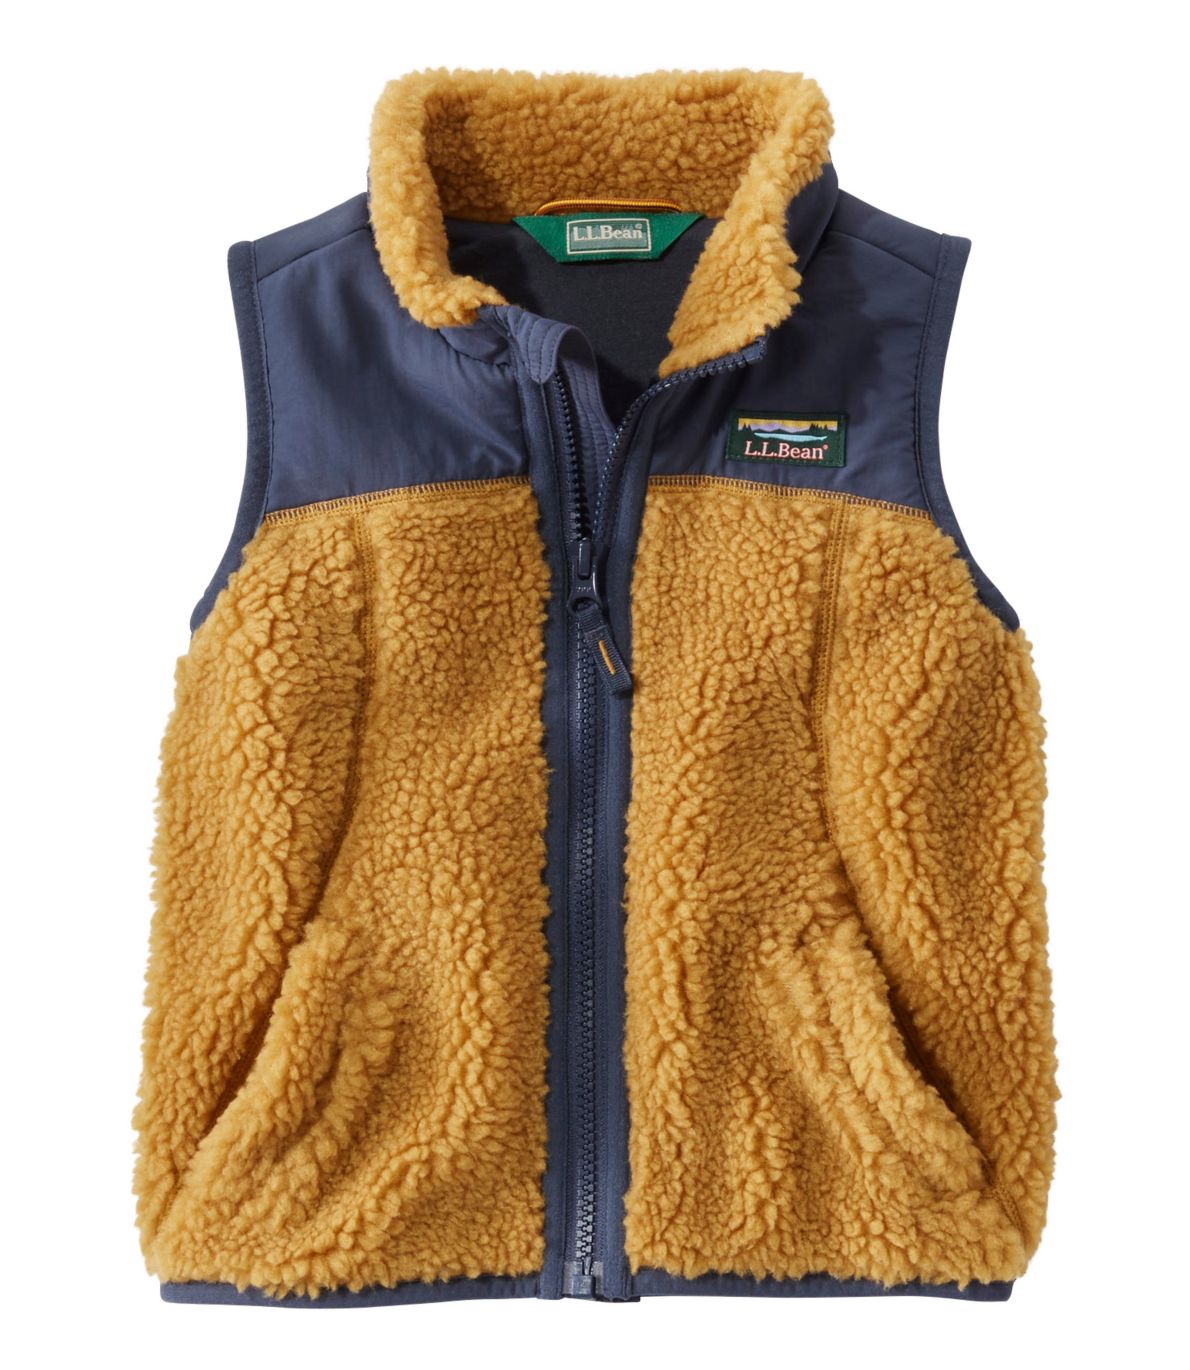 Infants' and Toddlers' Sherpa Fleece Vest